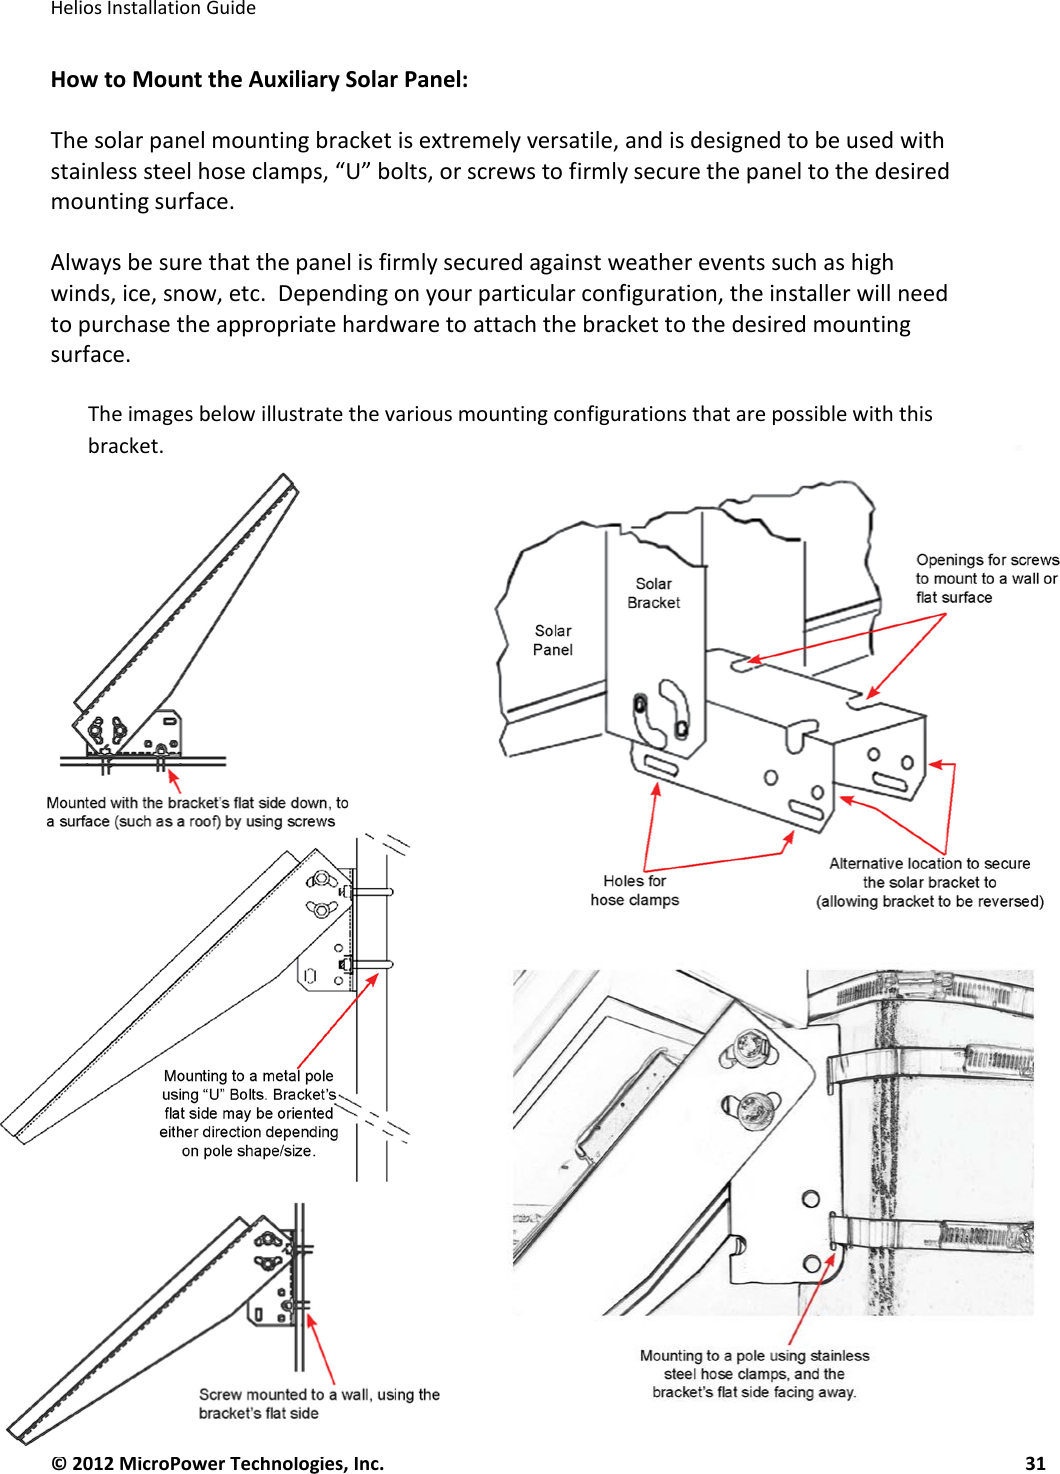   Helios Installation Guide  © 2012 MicroPower Technologies, Inc.      31   How to Mount the Auxiliary Solar Panel:  The solar panel mounting bracket is extremely versatile, and is designed to be used with stainless steel hose clamps, “U” bolts, or screws to firmly secure the panel to the desired mounting surface.   Always be sure that the panel is firmly secured against weather events such as high winds, ice, snow, etc.  Depending on your particular configuration, the installer will need to purchase the appropriate hardware to attach the bracket to the desired mounting surface.  The images below illustrate the various mounting configurations that are possible with this bracket.   